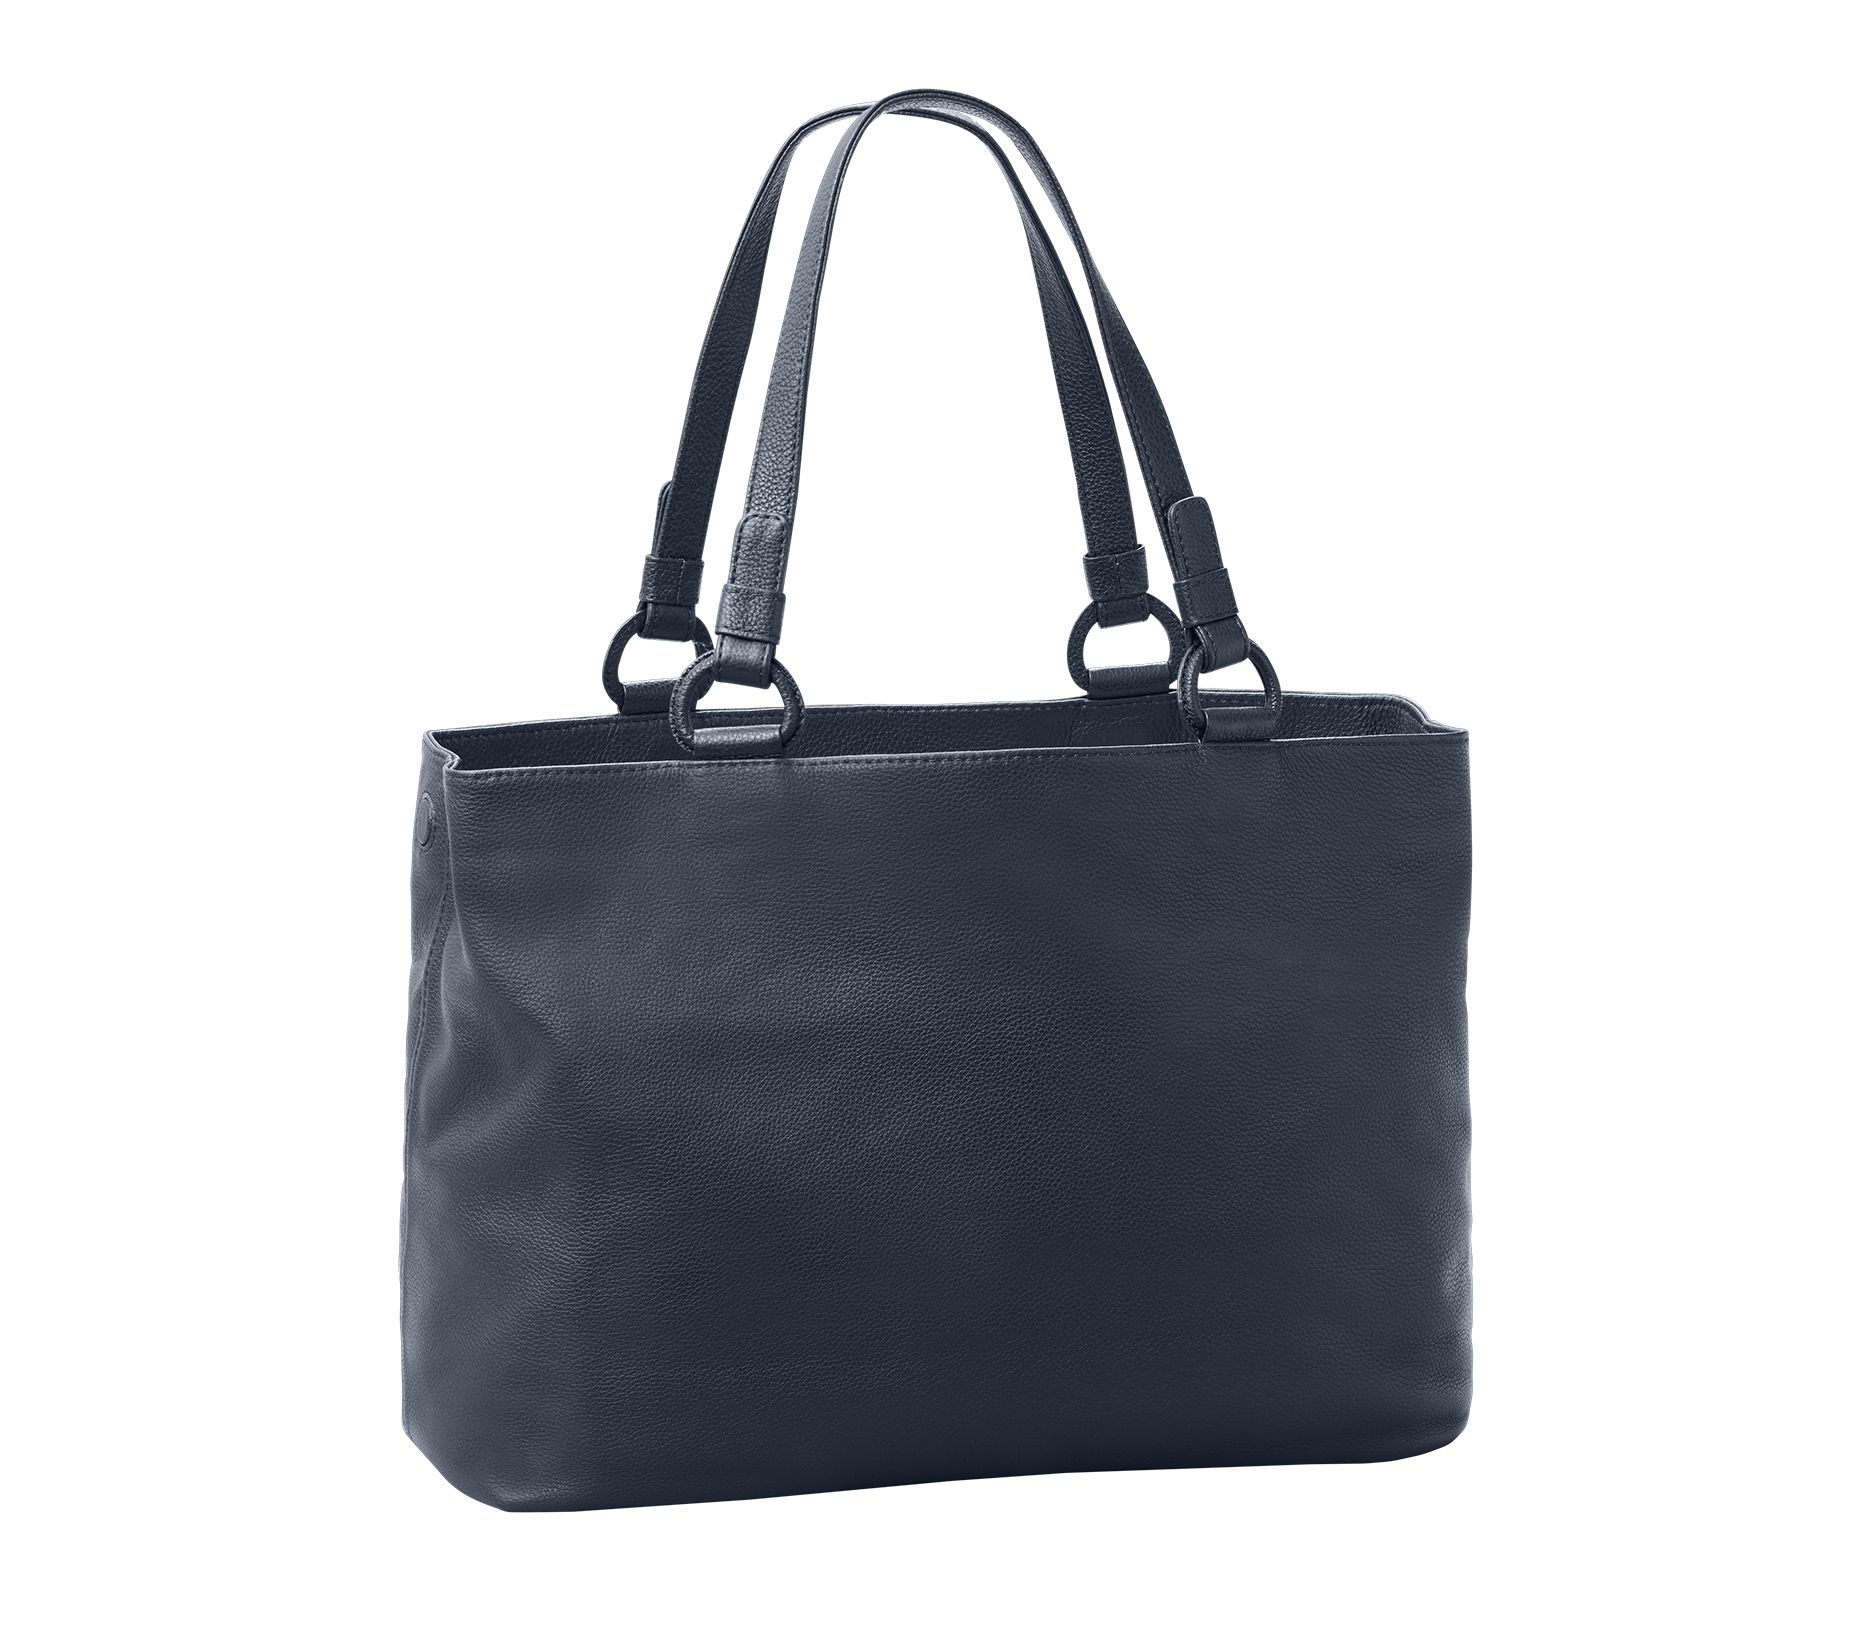 Marcella Leather Travel Tote in Navy